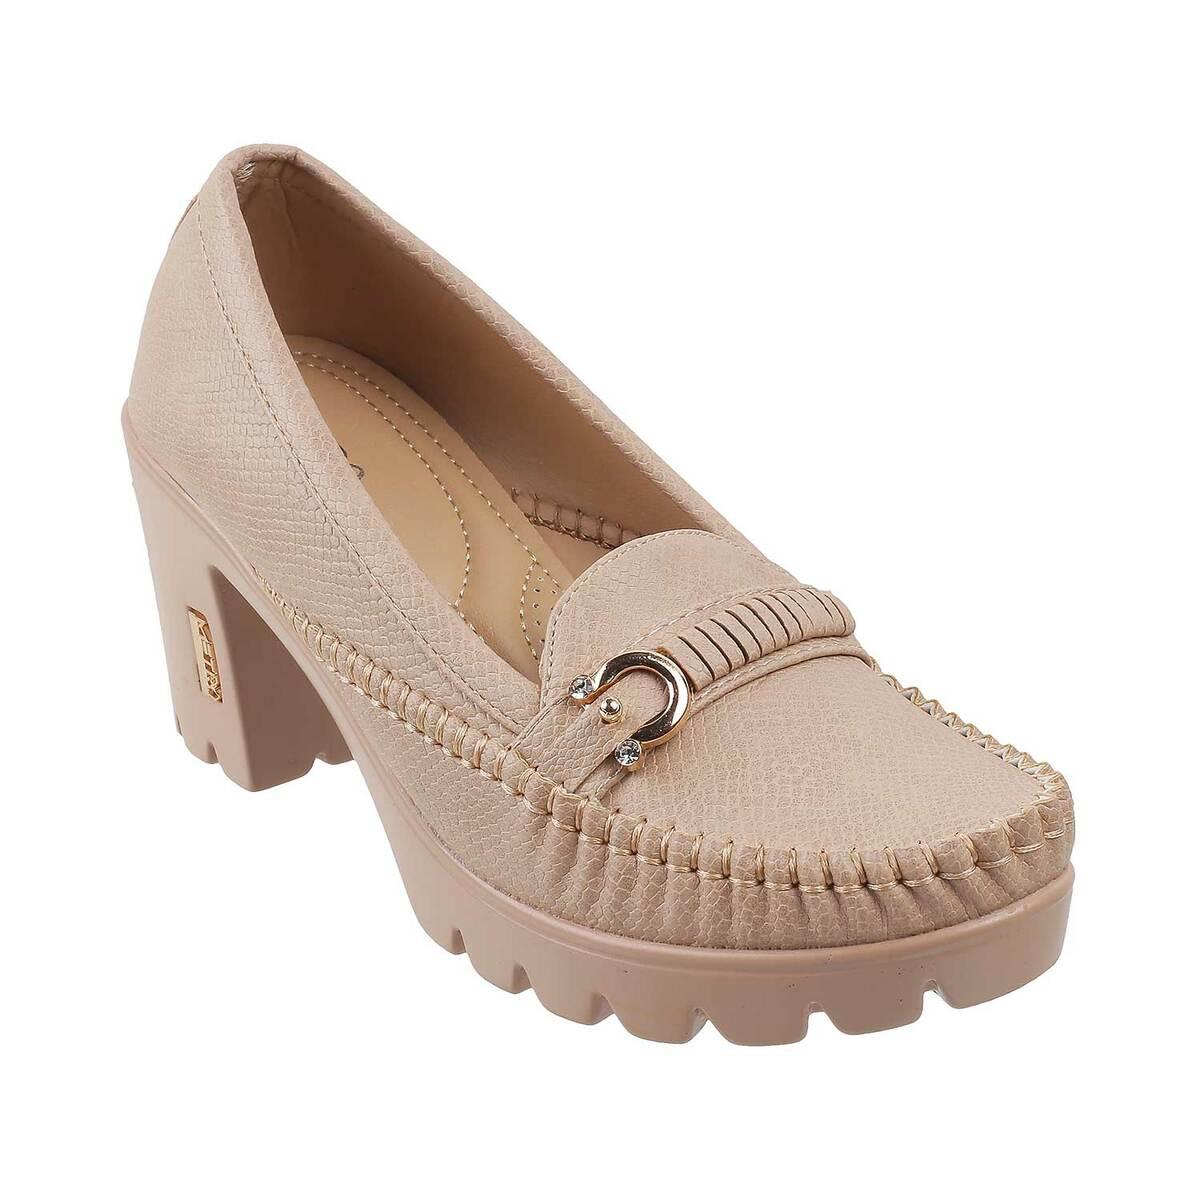 Sherrif Shoes Womens Beige Block Heel Pumps Buy Sherrif Shoes Womens Beige  Block Heel Pumps Online at Best Price in India  Nykaa